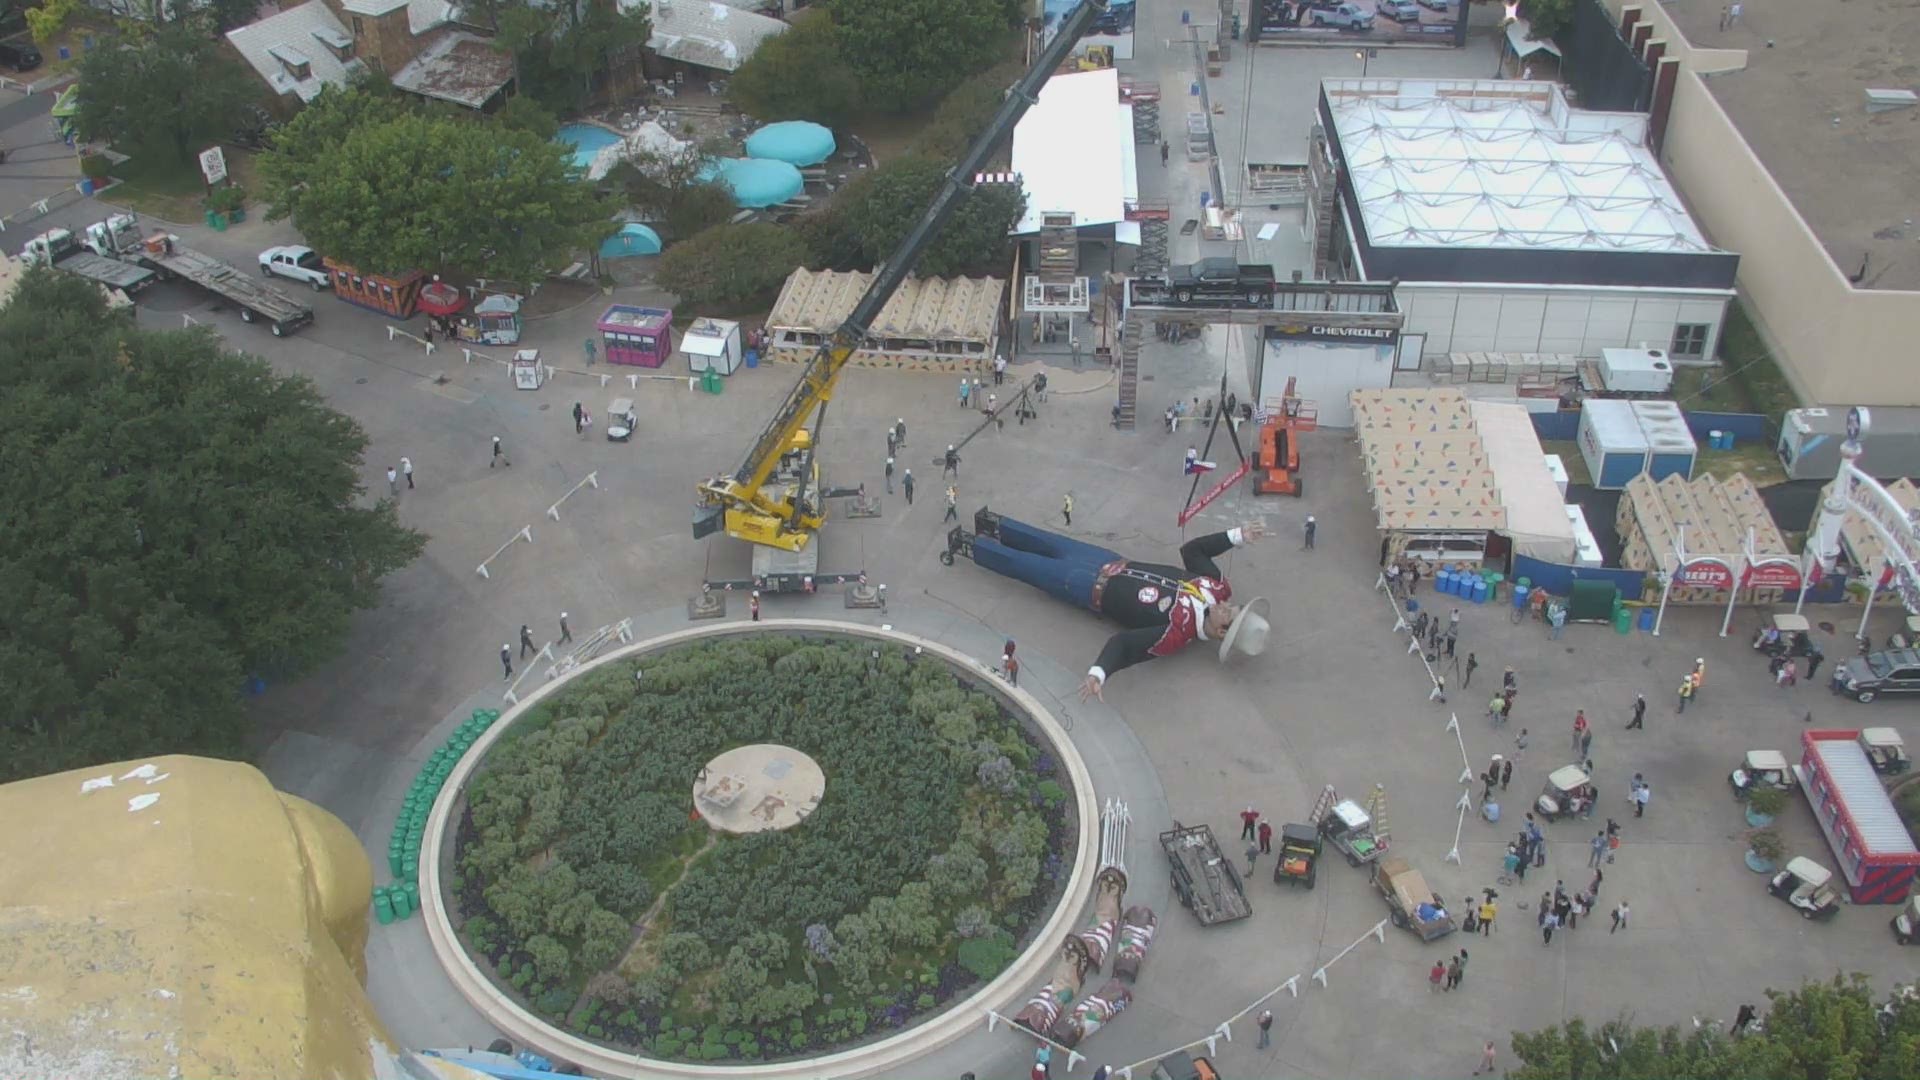 Take a quick look into the process of getting Big Tex into position before the start of State Fair of Texas.